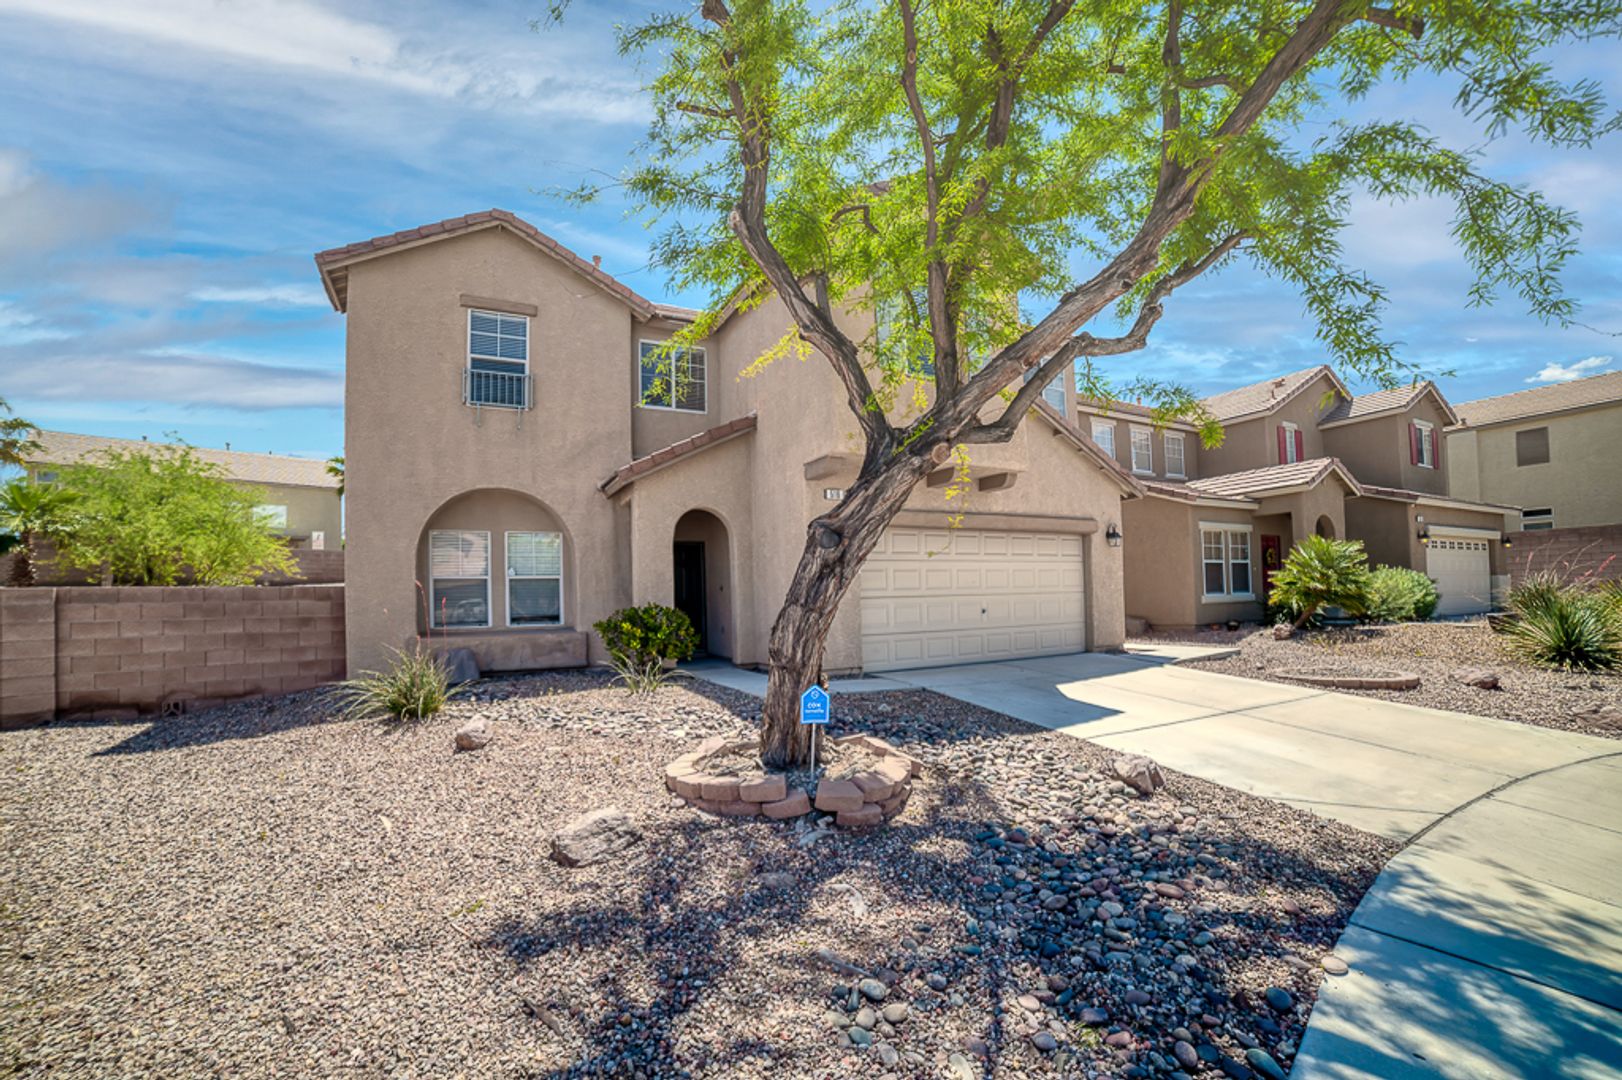 MOVE IN READY 2-STORY 3-BEDROOM HOME IN HENDERSON!